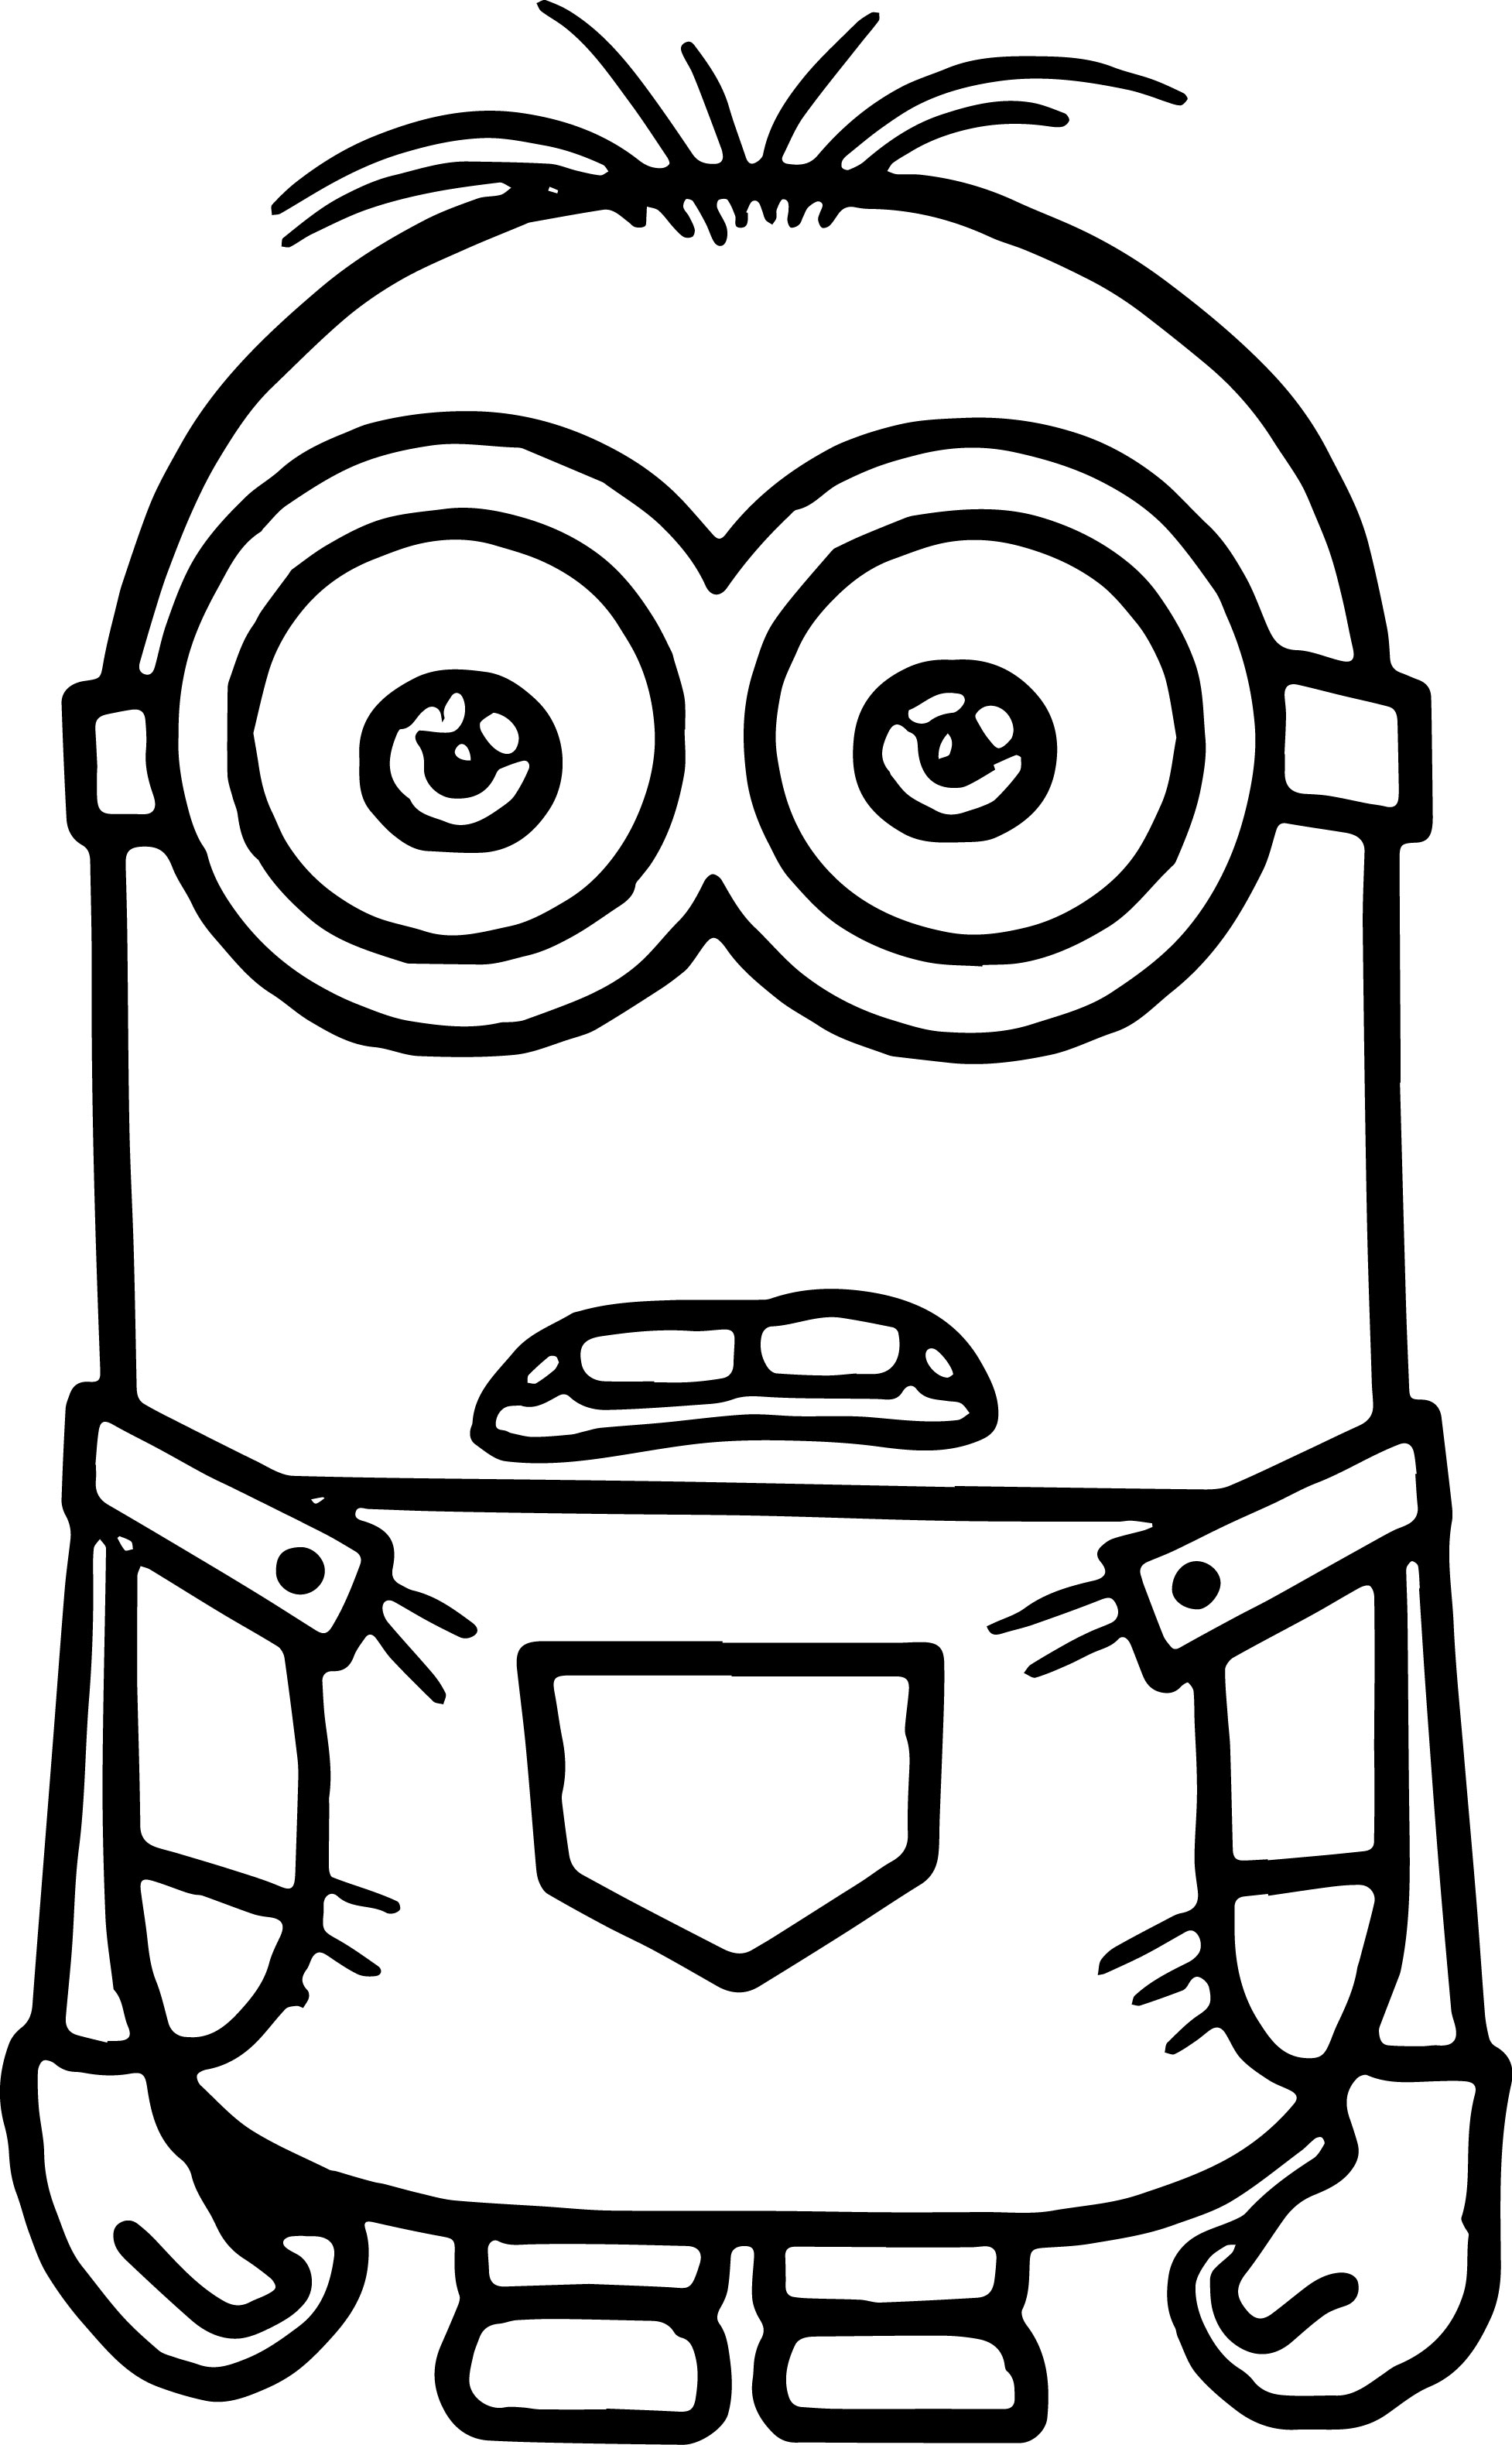 Minion Coloring Pages Fotolip com Rich image and wallpaper